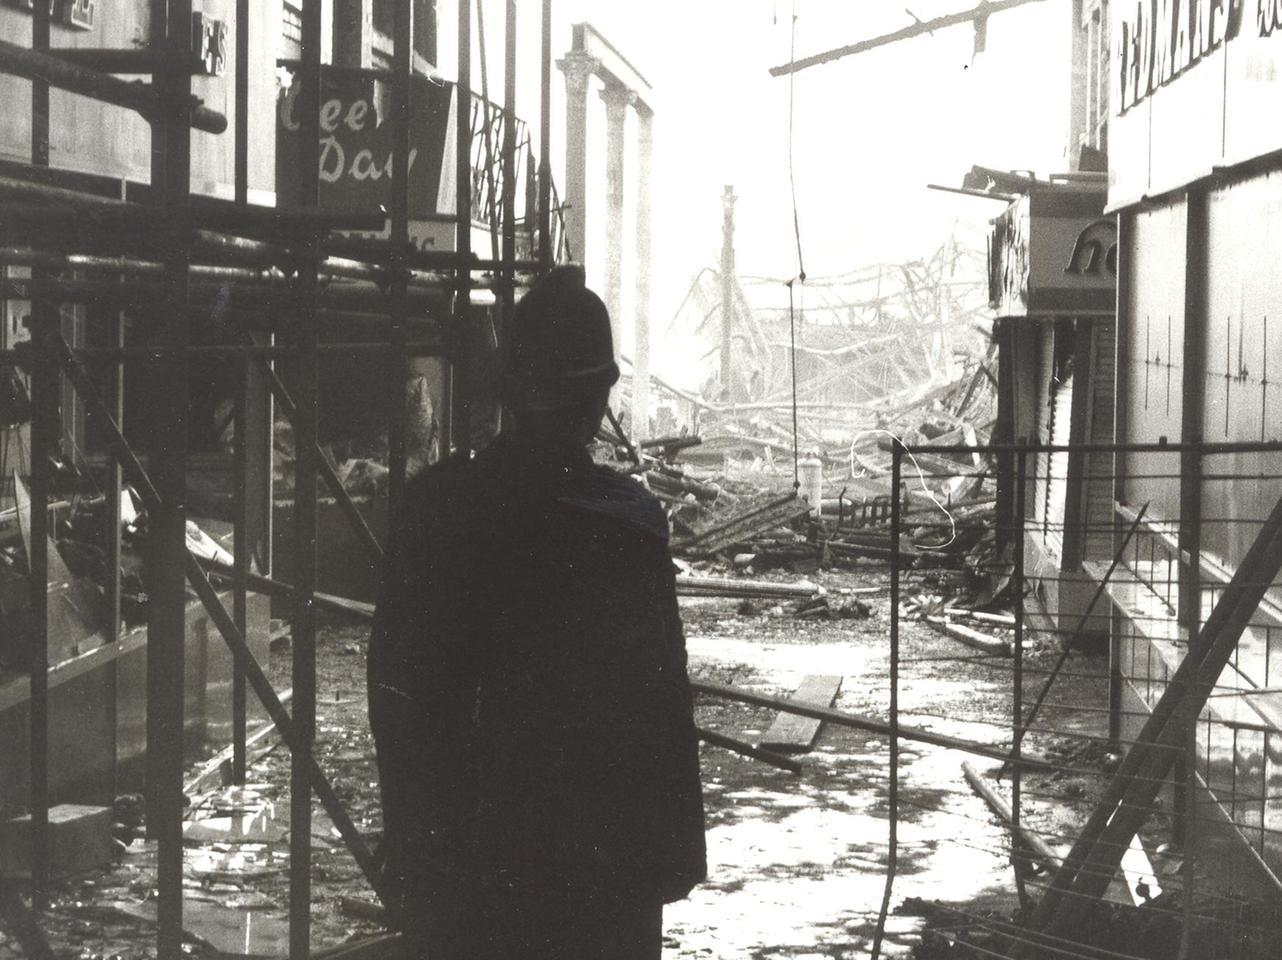 A policeman looks at the extent of the damage in this atmospheric photo.